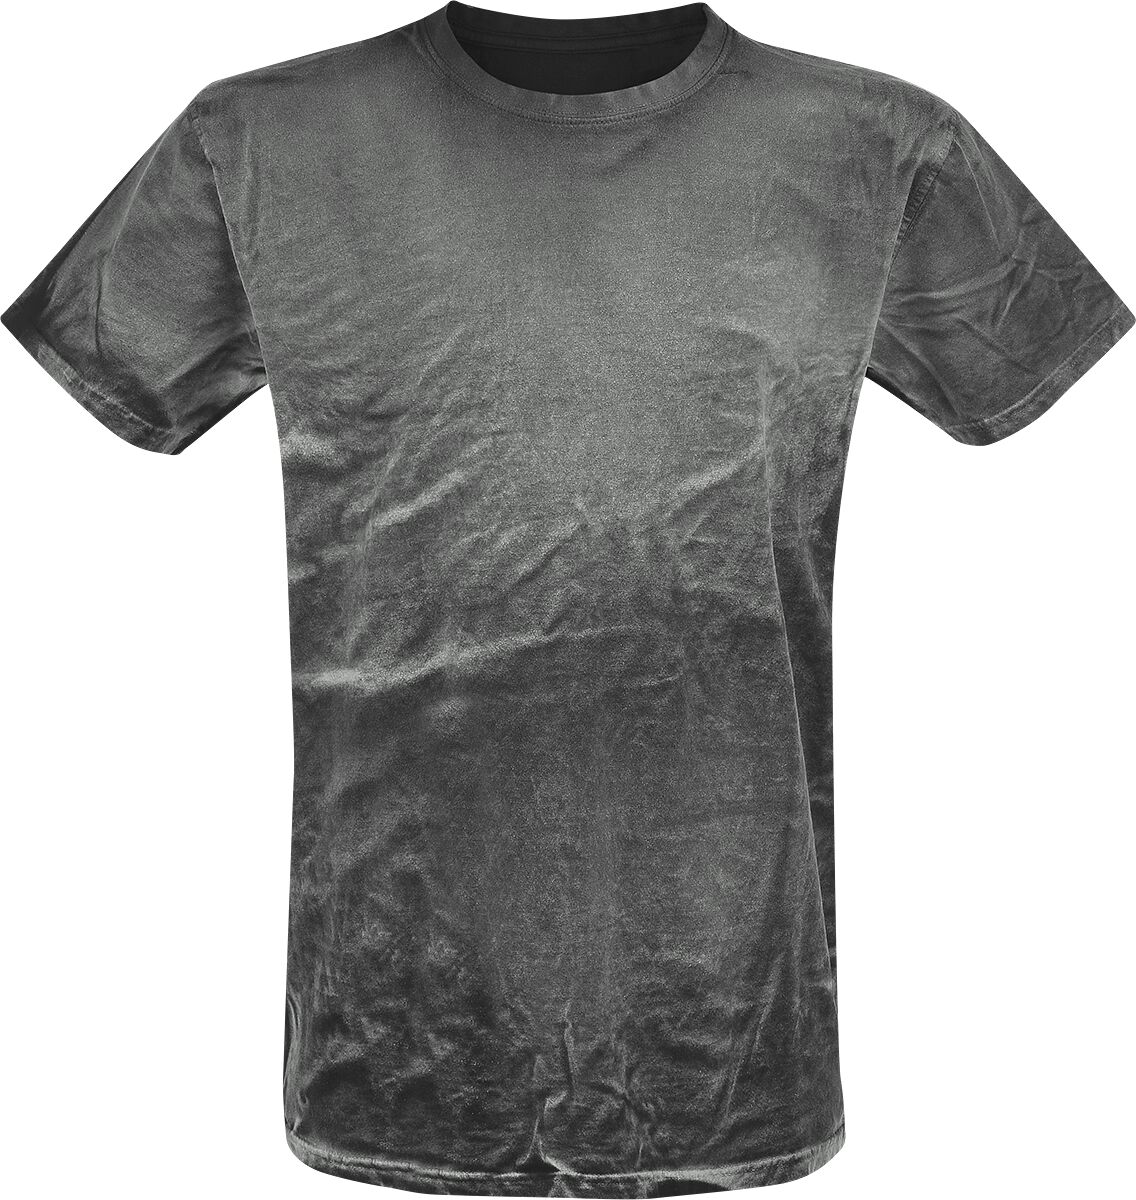 Image of T-Shirt di Outer Vision - Spray Washed Black Shirt - S a 3XL - Uomo - grigio